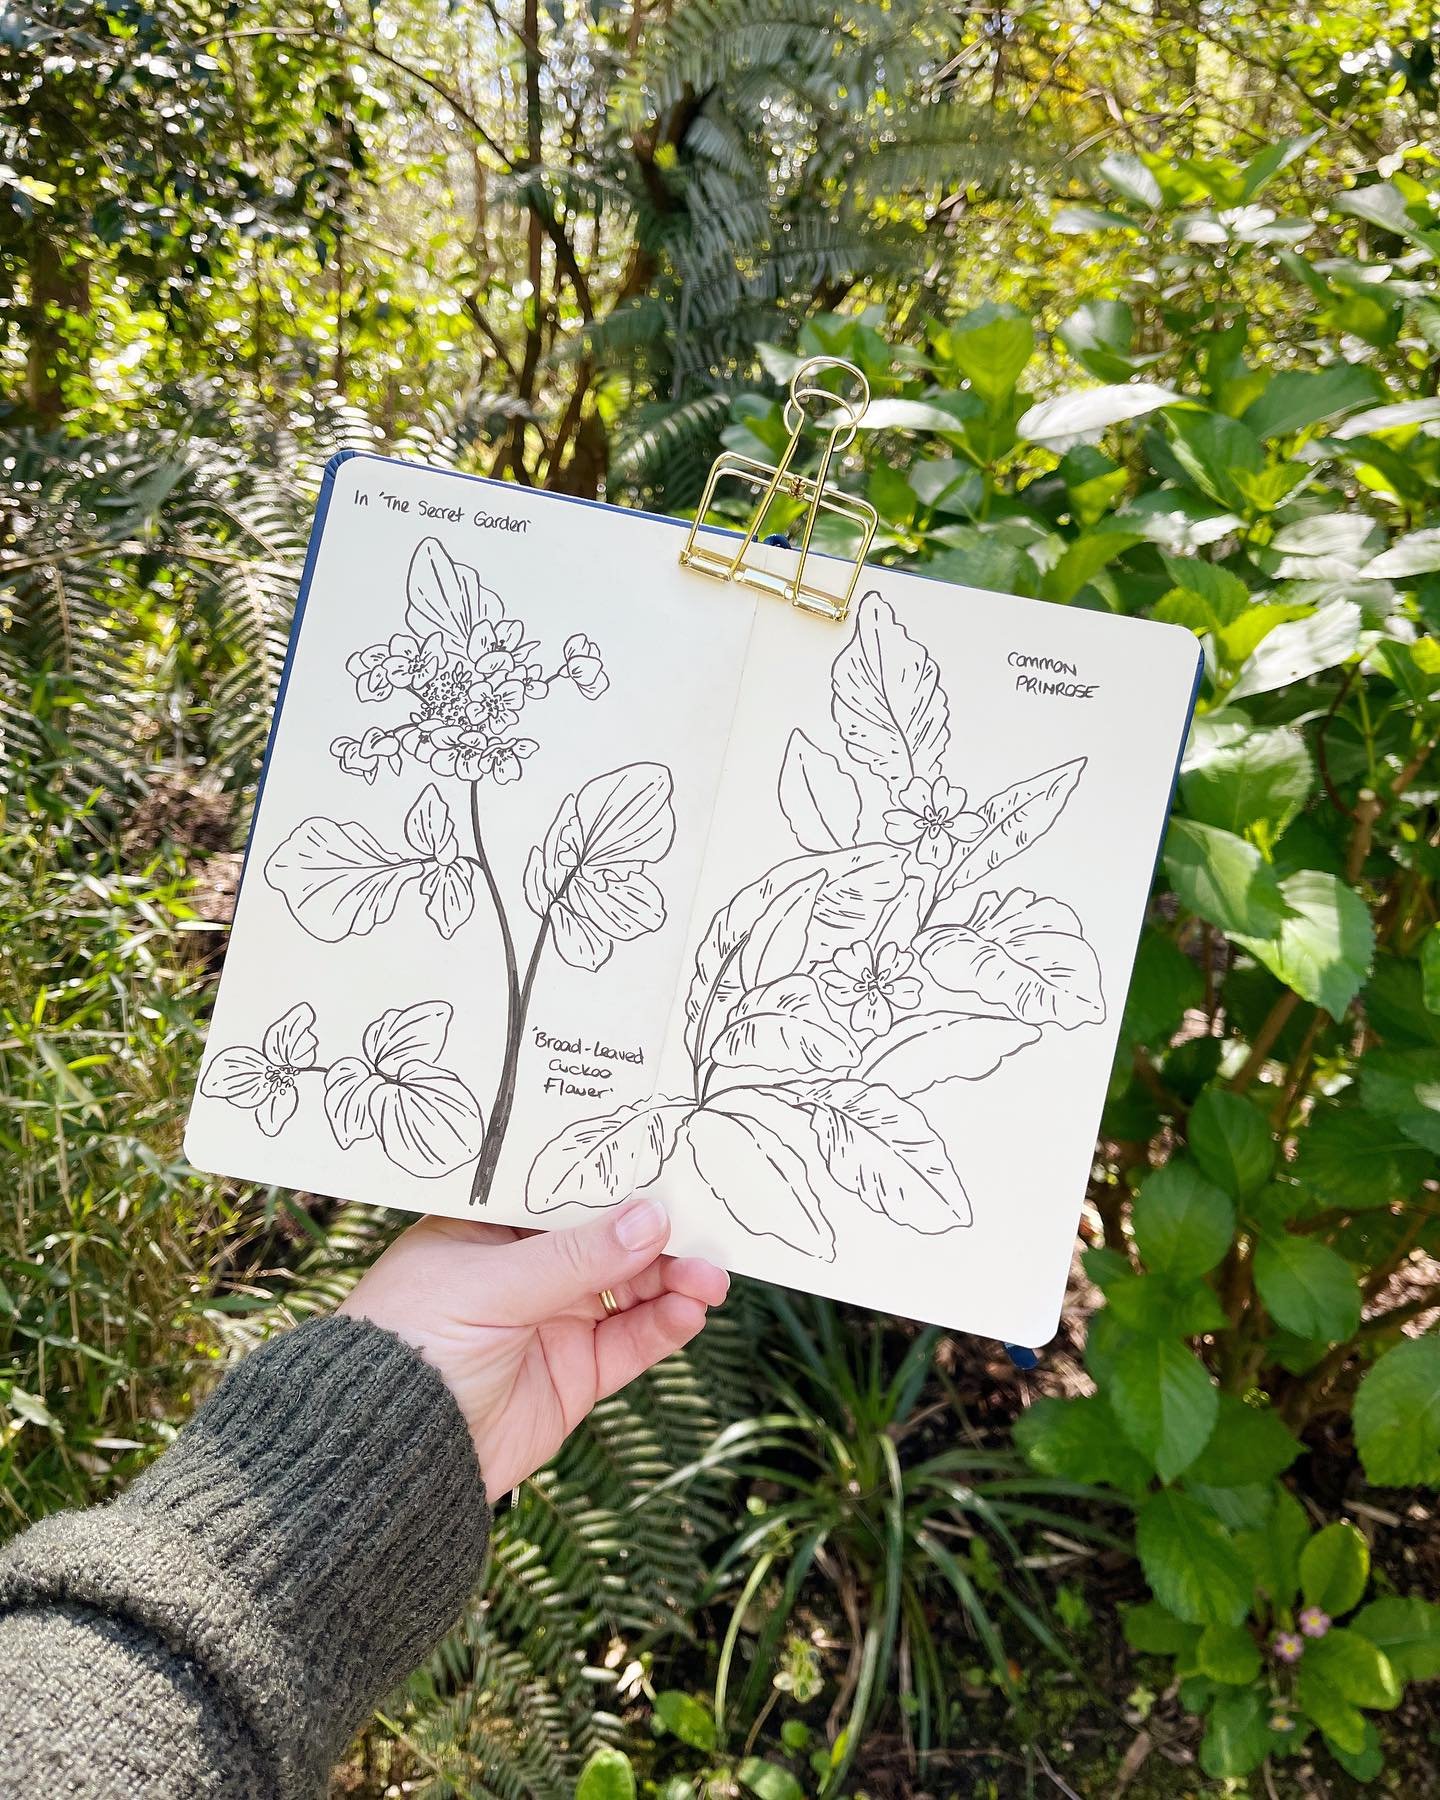 Sketchbook pages from today at @pinetum_gardens 🌿✍️